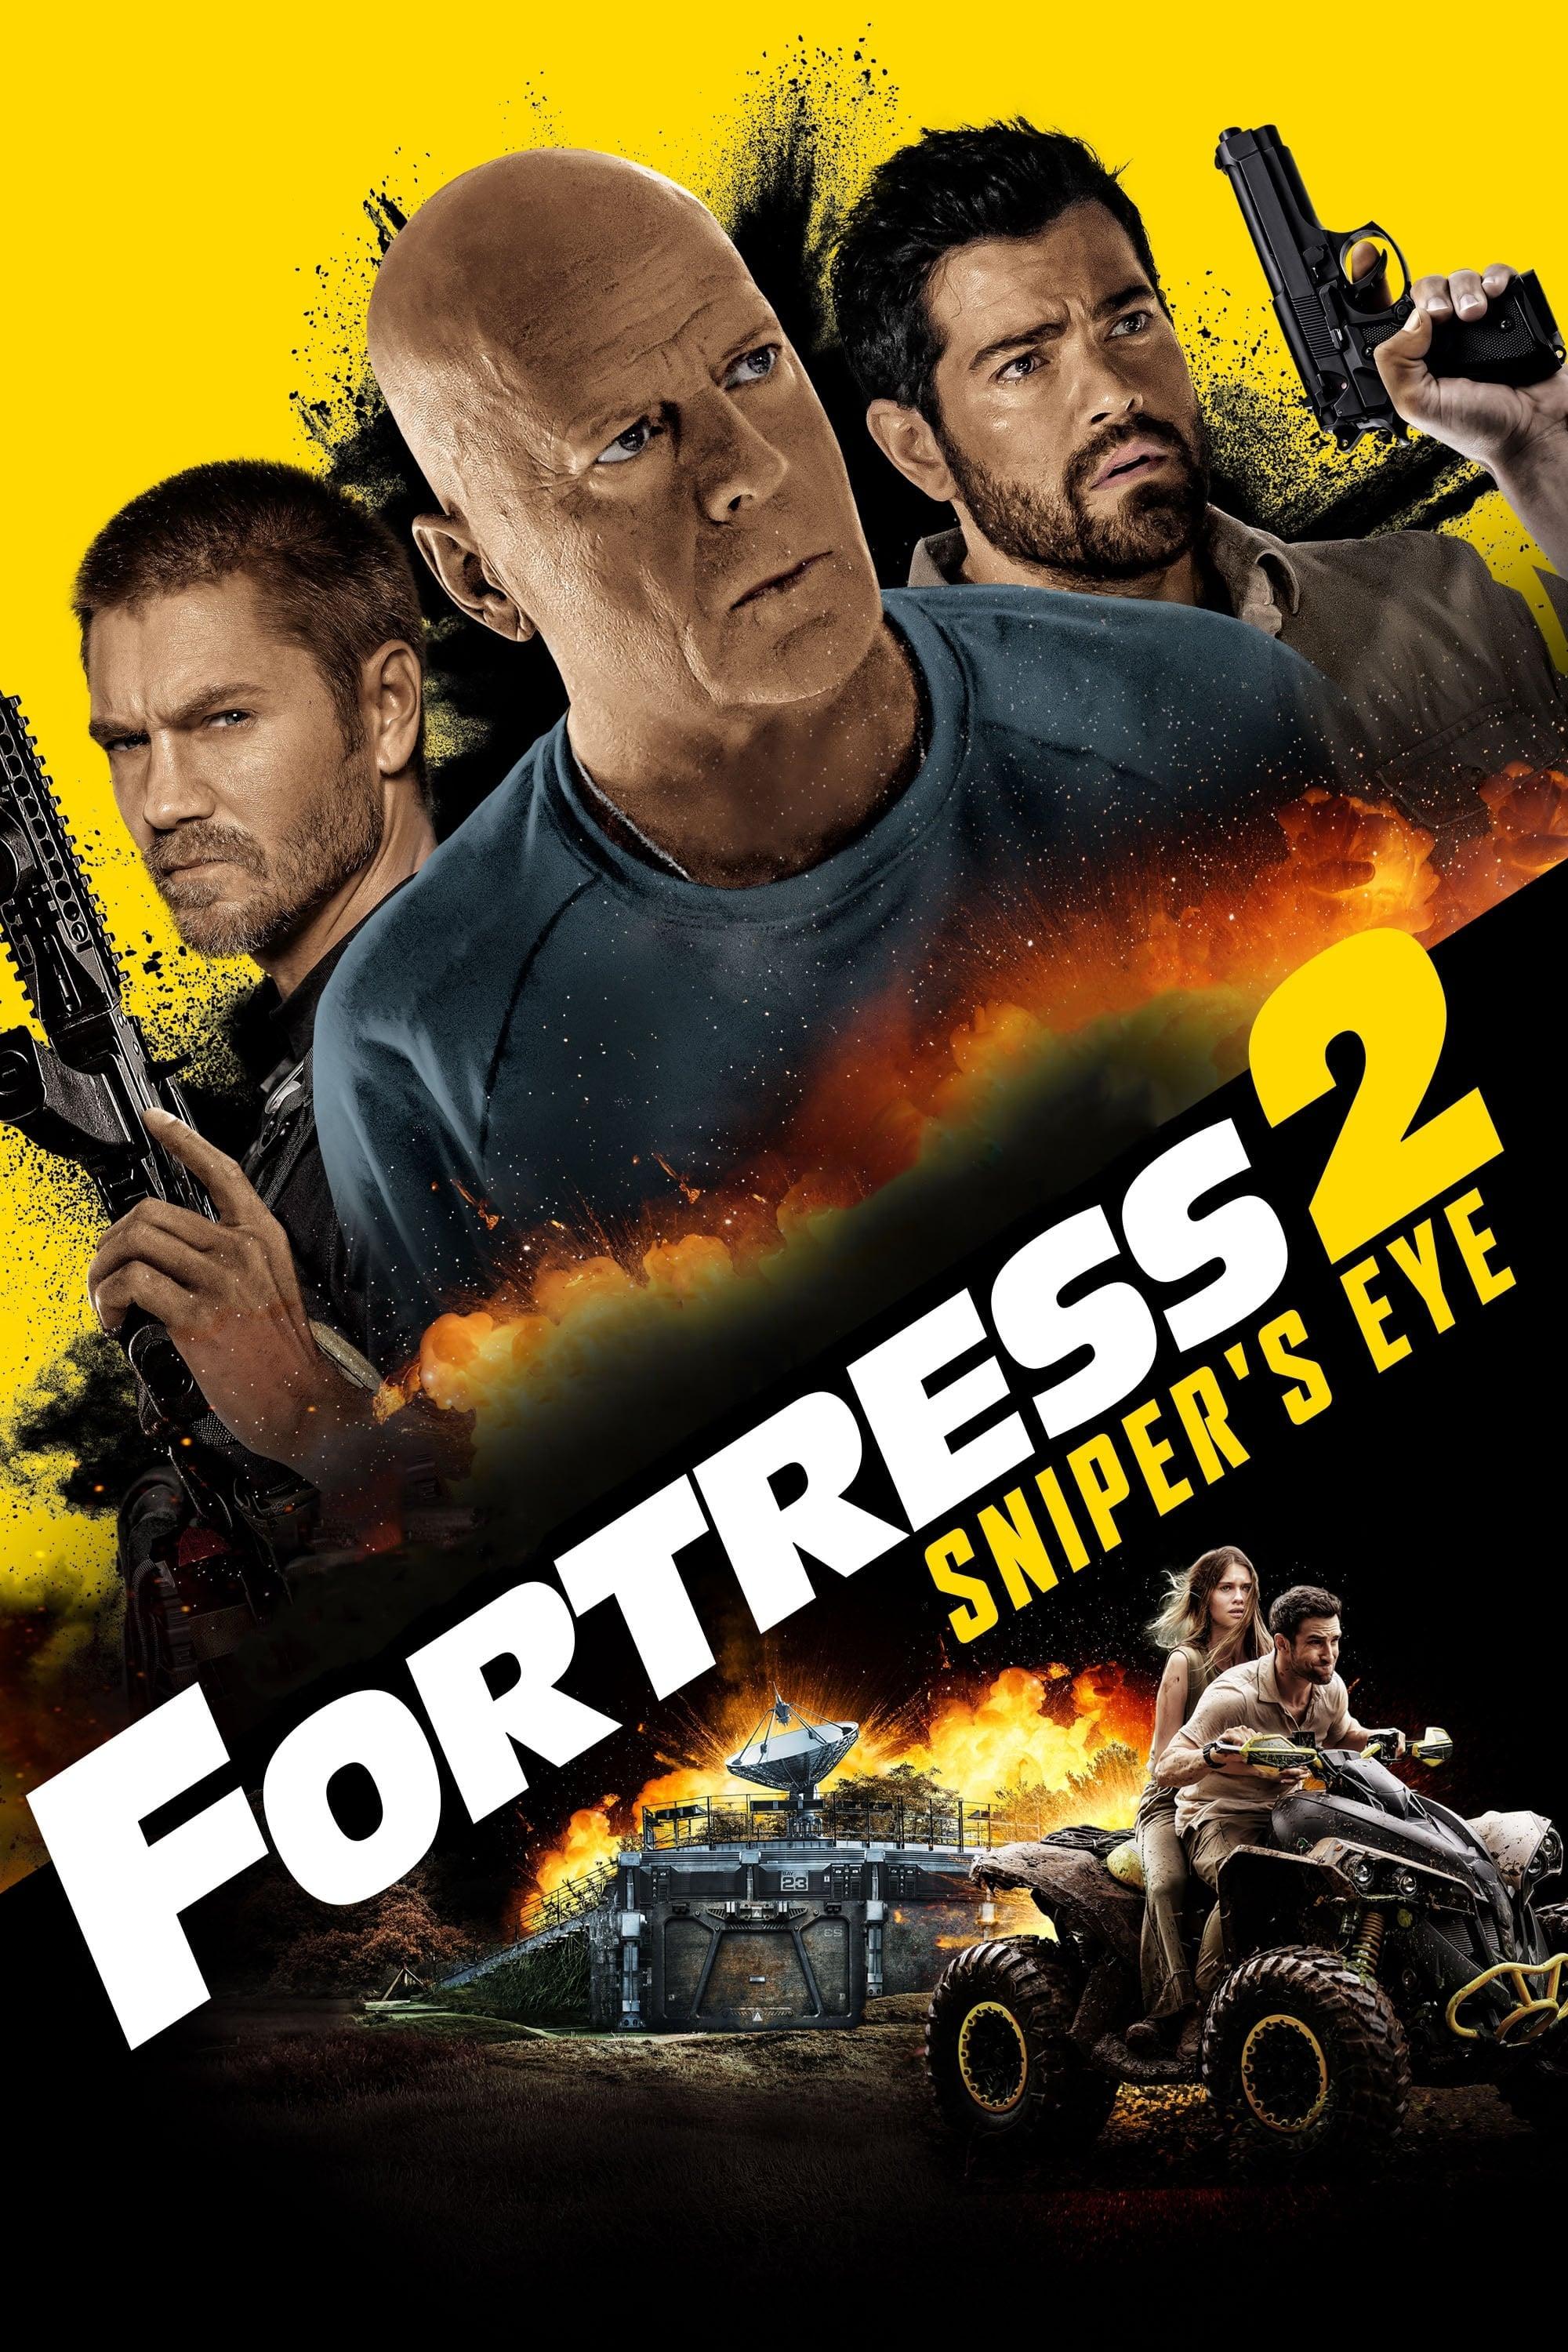 Fortress: Sniper's Eye poster